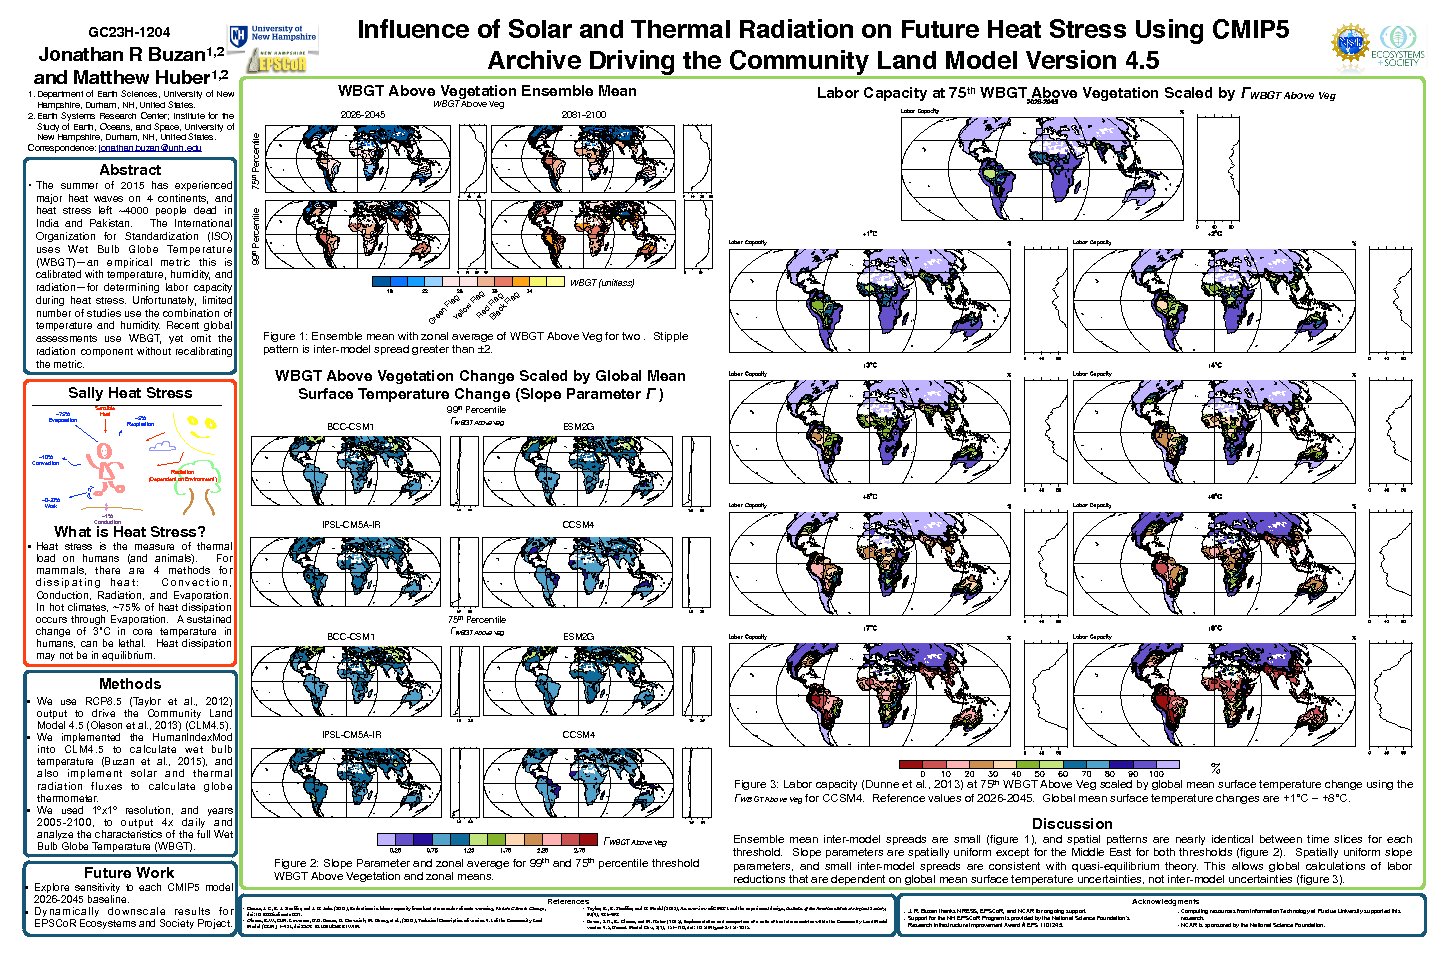 Influence Of Solar And Thermal Radiation On Future Heat Stress Using Cmip5 Archive Driving The Community Land Model Version 4.5 by jbuzan